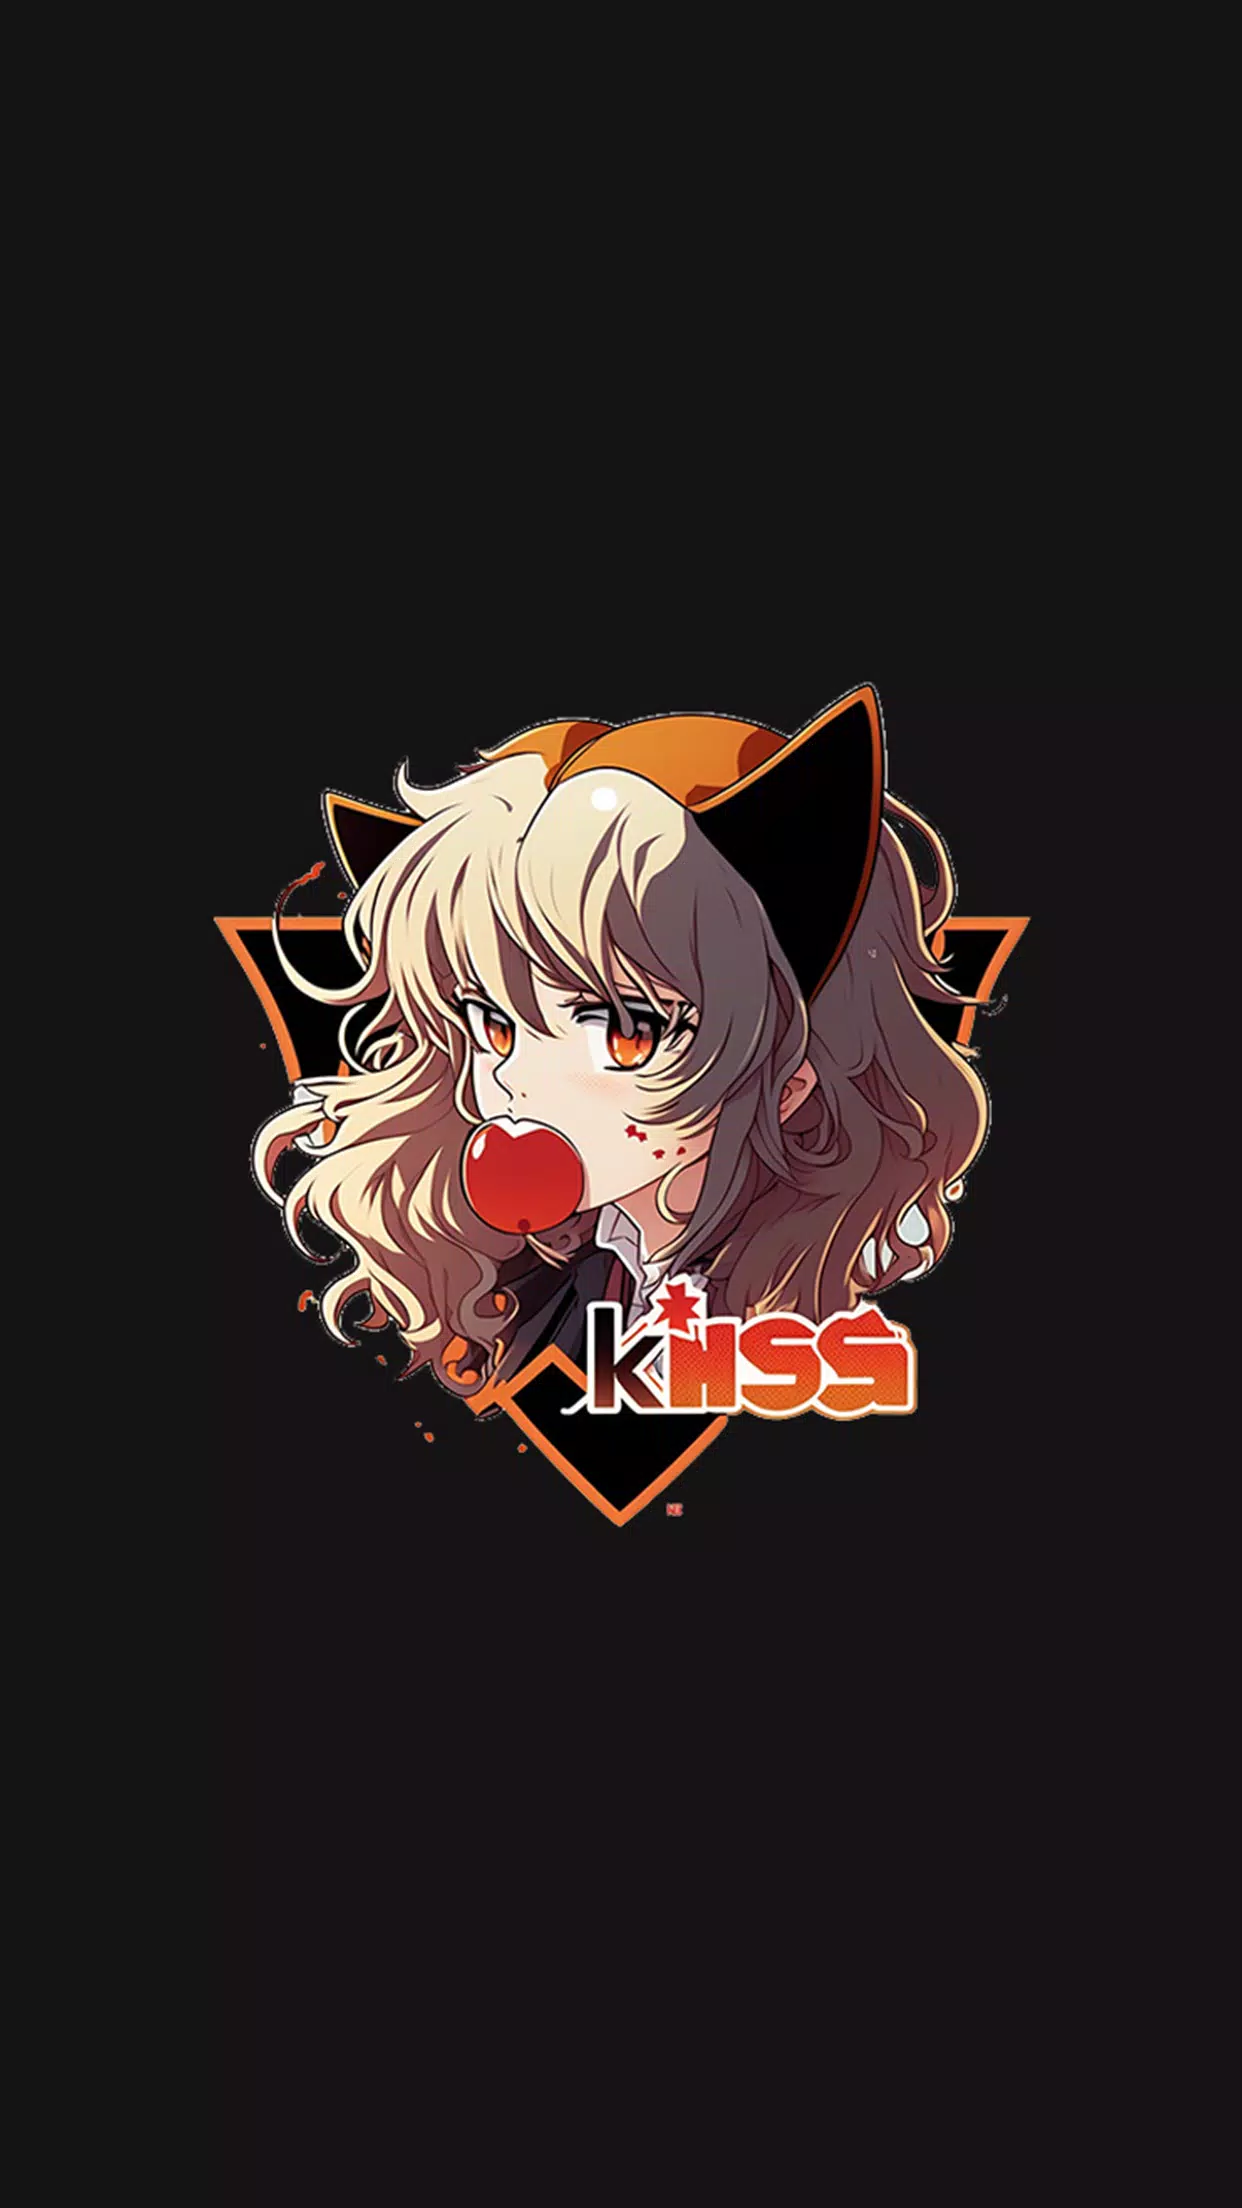 Kiss anime : watch anime APK (Android App) - Free Download